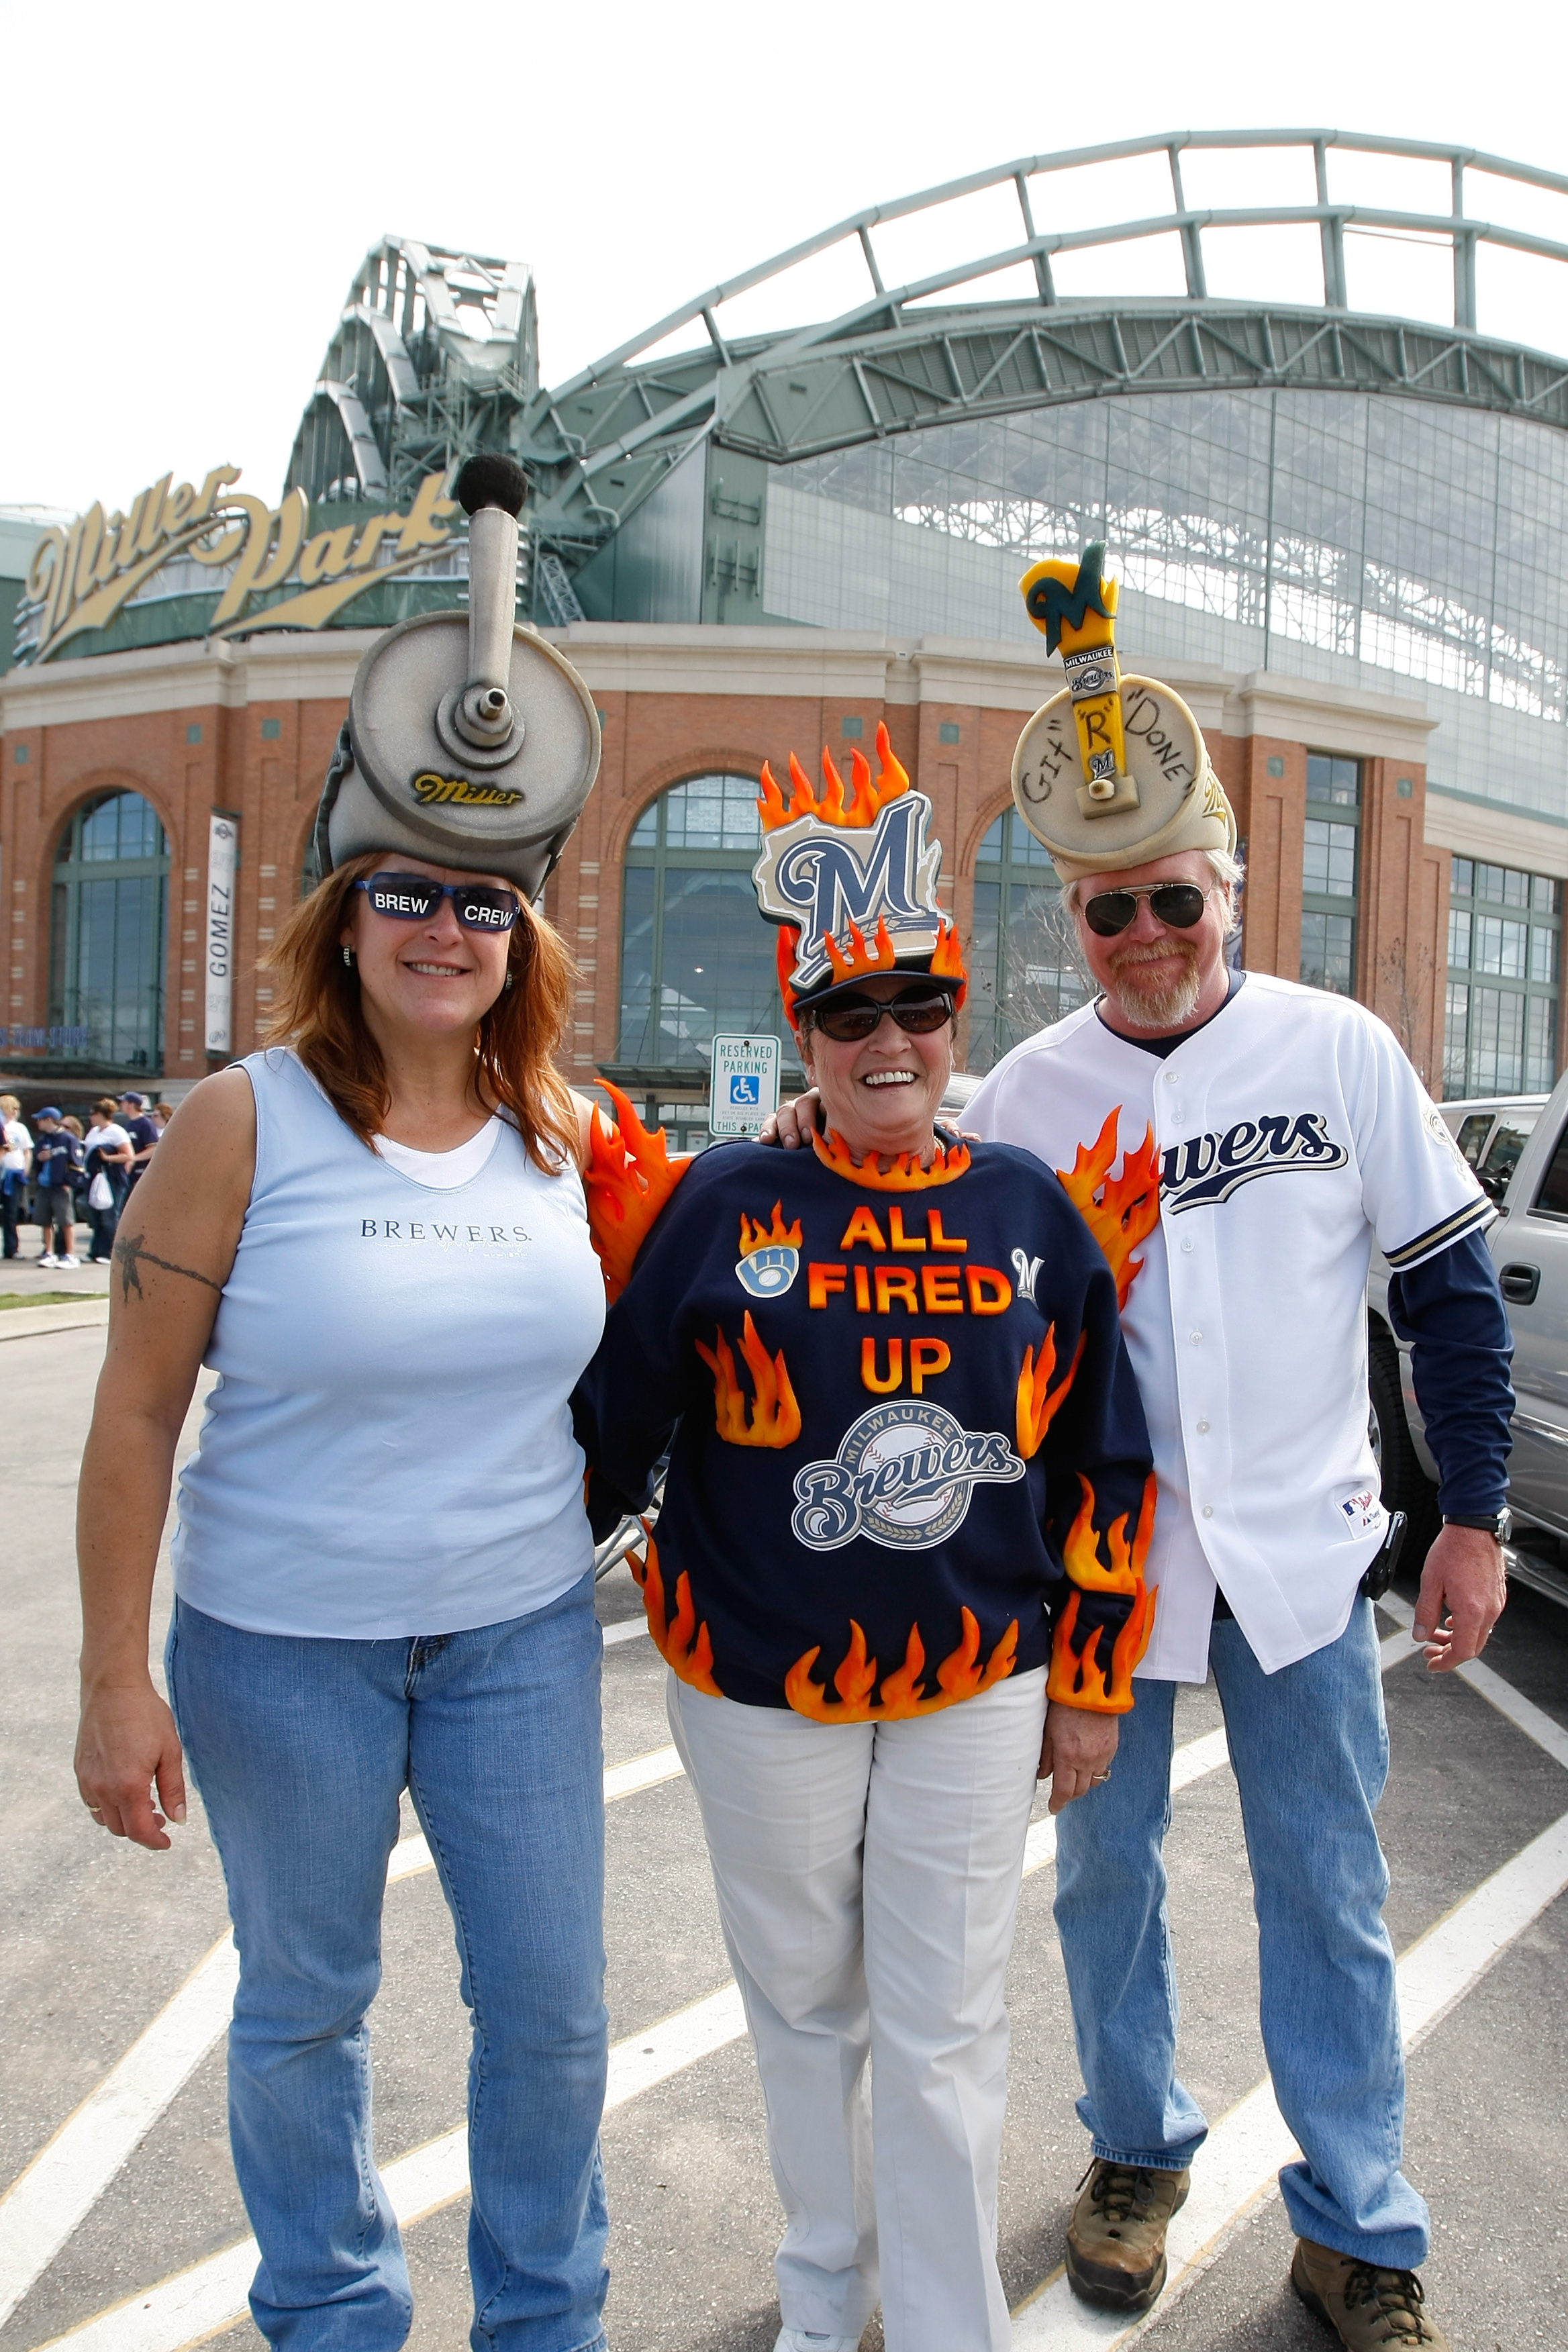 MILWAUKEE, WI - APRIL 05: Brewers fans pose for a picture as they tailgate outside of Miller Park prior to the game between the Colorado Rockies and the Milwaukee Brewers at Miller Park on April 5, 2010 in Milwaukee, Wisconsin. (Photo by Scott Boehm/Getty